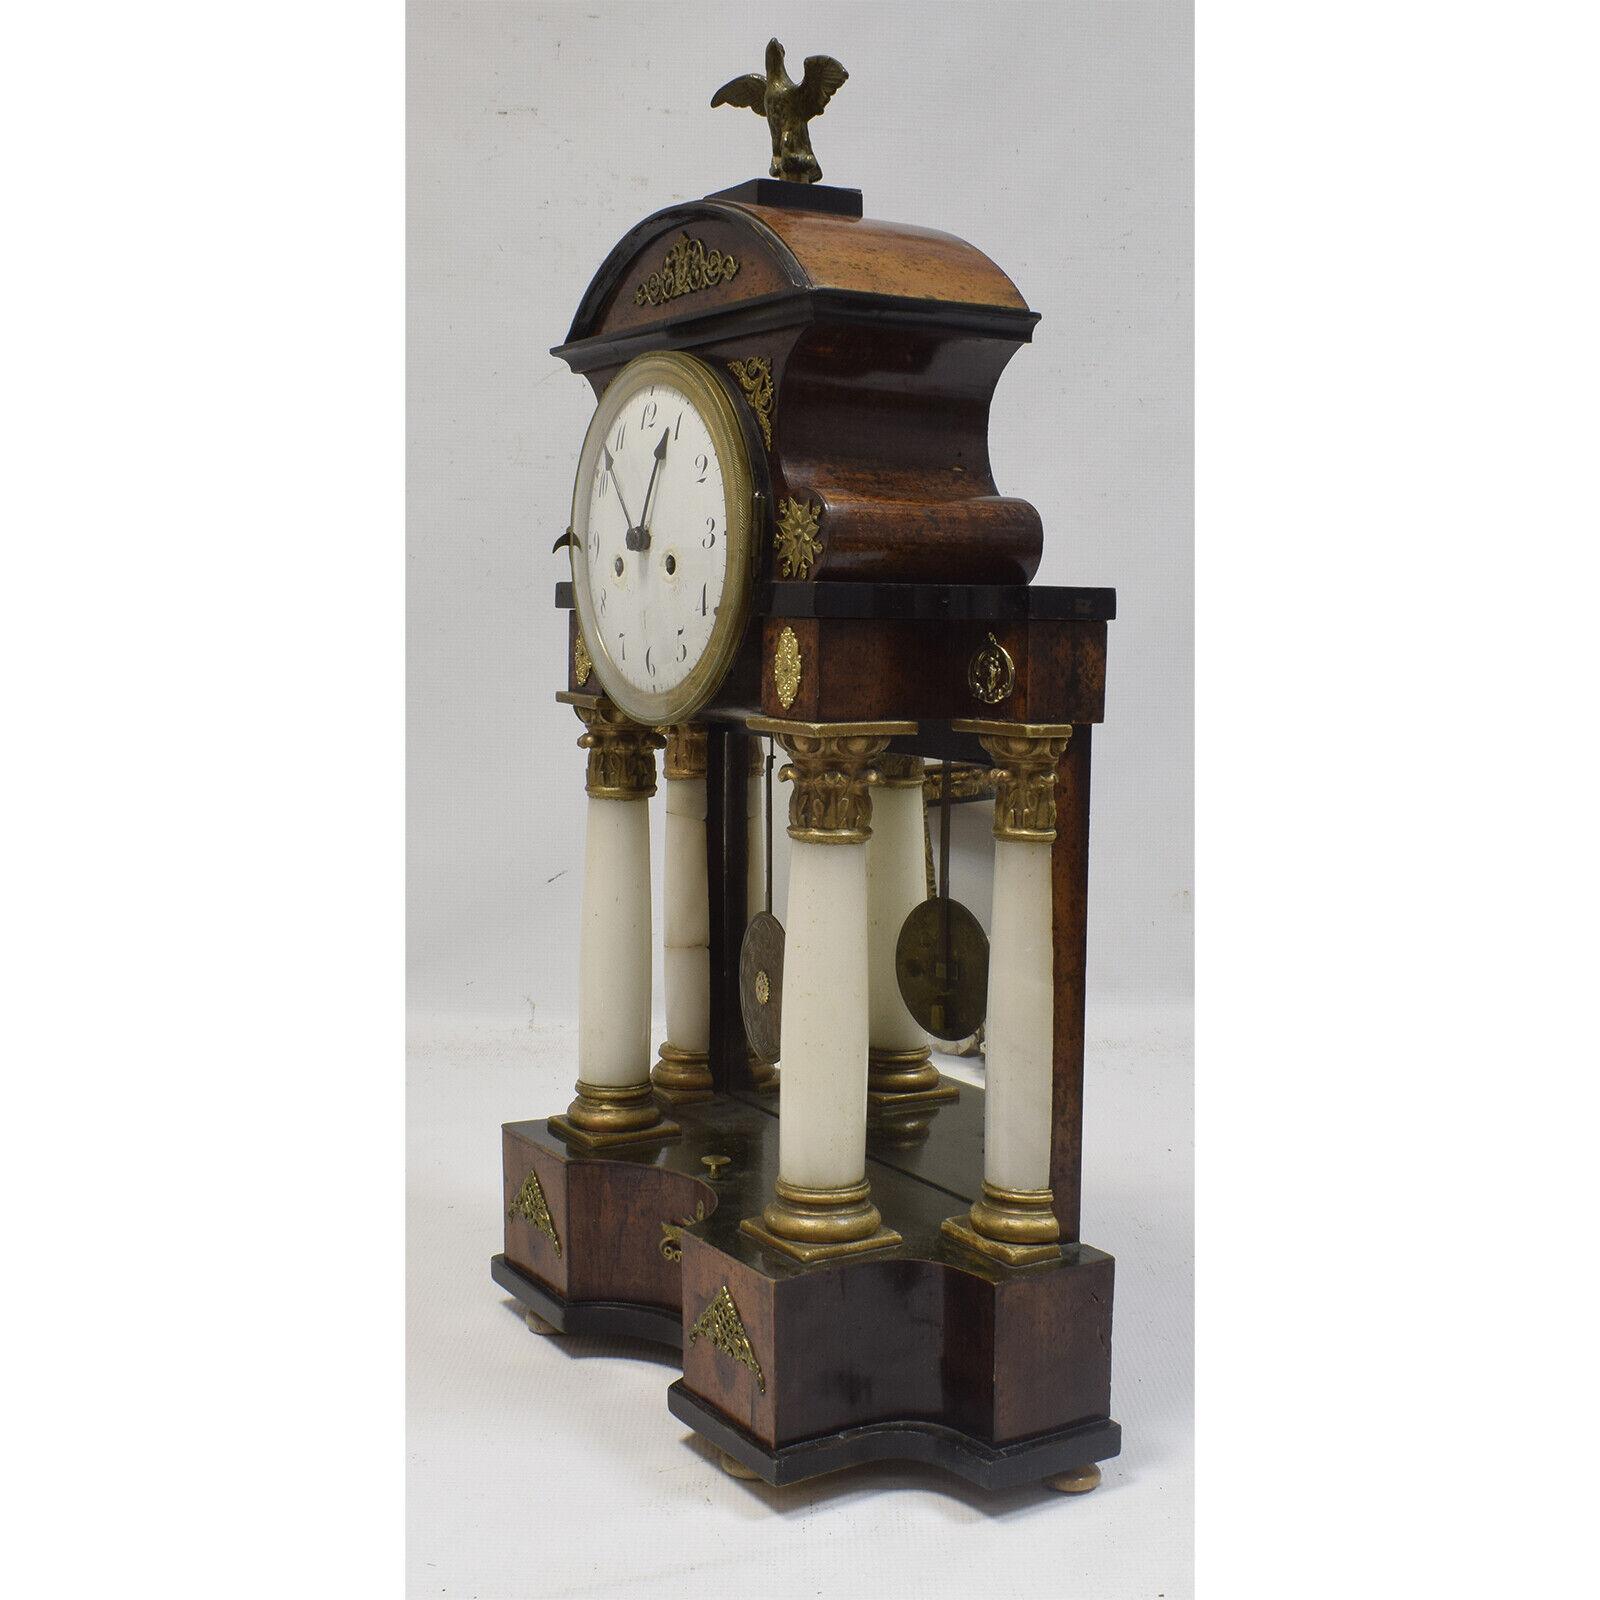 Experience the timeless beauty of this functional 19th-century column clock, an exquisite piece that captures the essence of an era. Standing at a height of 58 cm, this antique mantel clock features a portico supported by four white alabaster